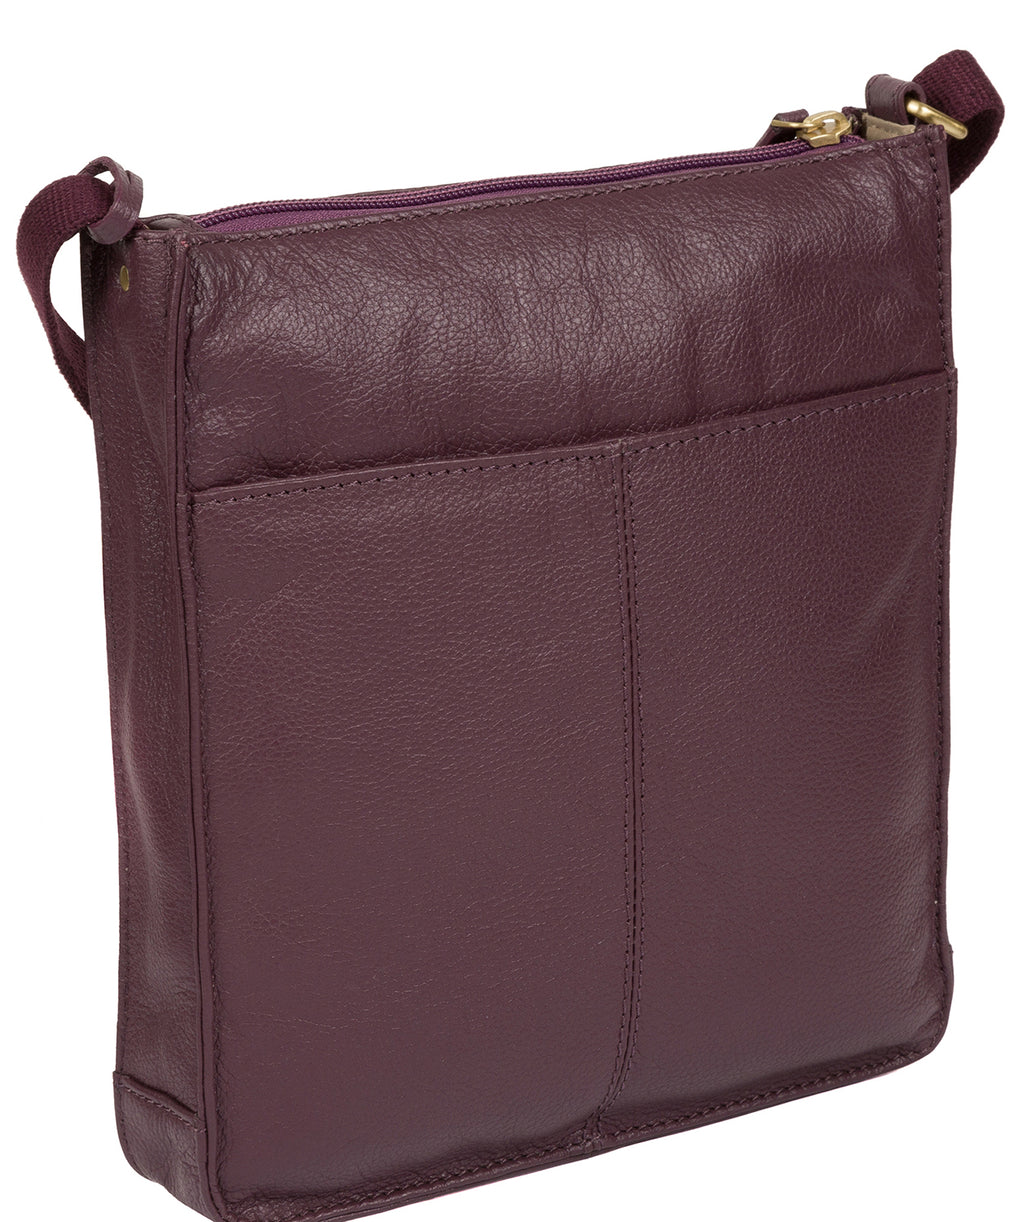 Purple Leather Crossbody Bag 'Sarah' by Cultured London – Pure Luxuries ...